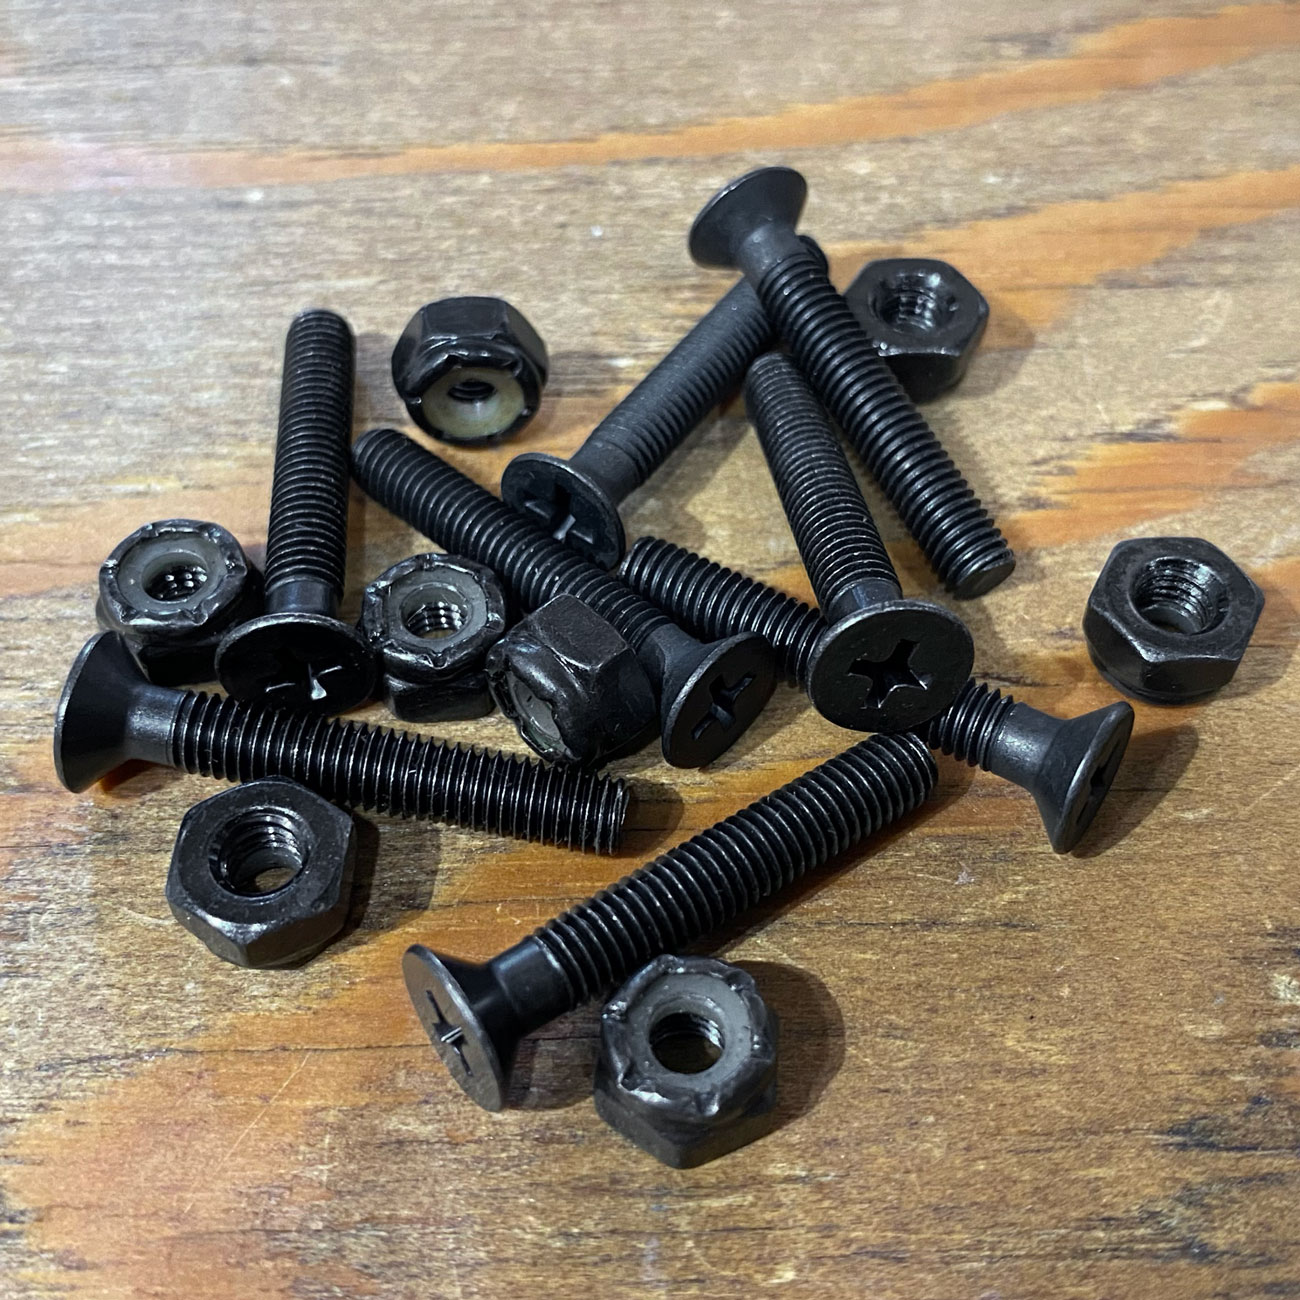 【1 1/4inch】HARD ZEISS MOUNTING BOLTS